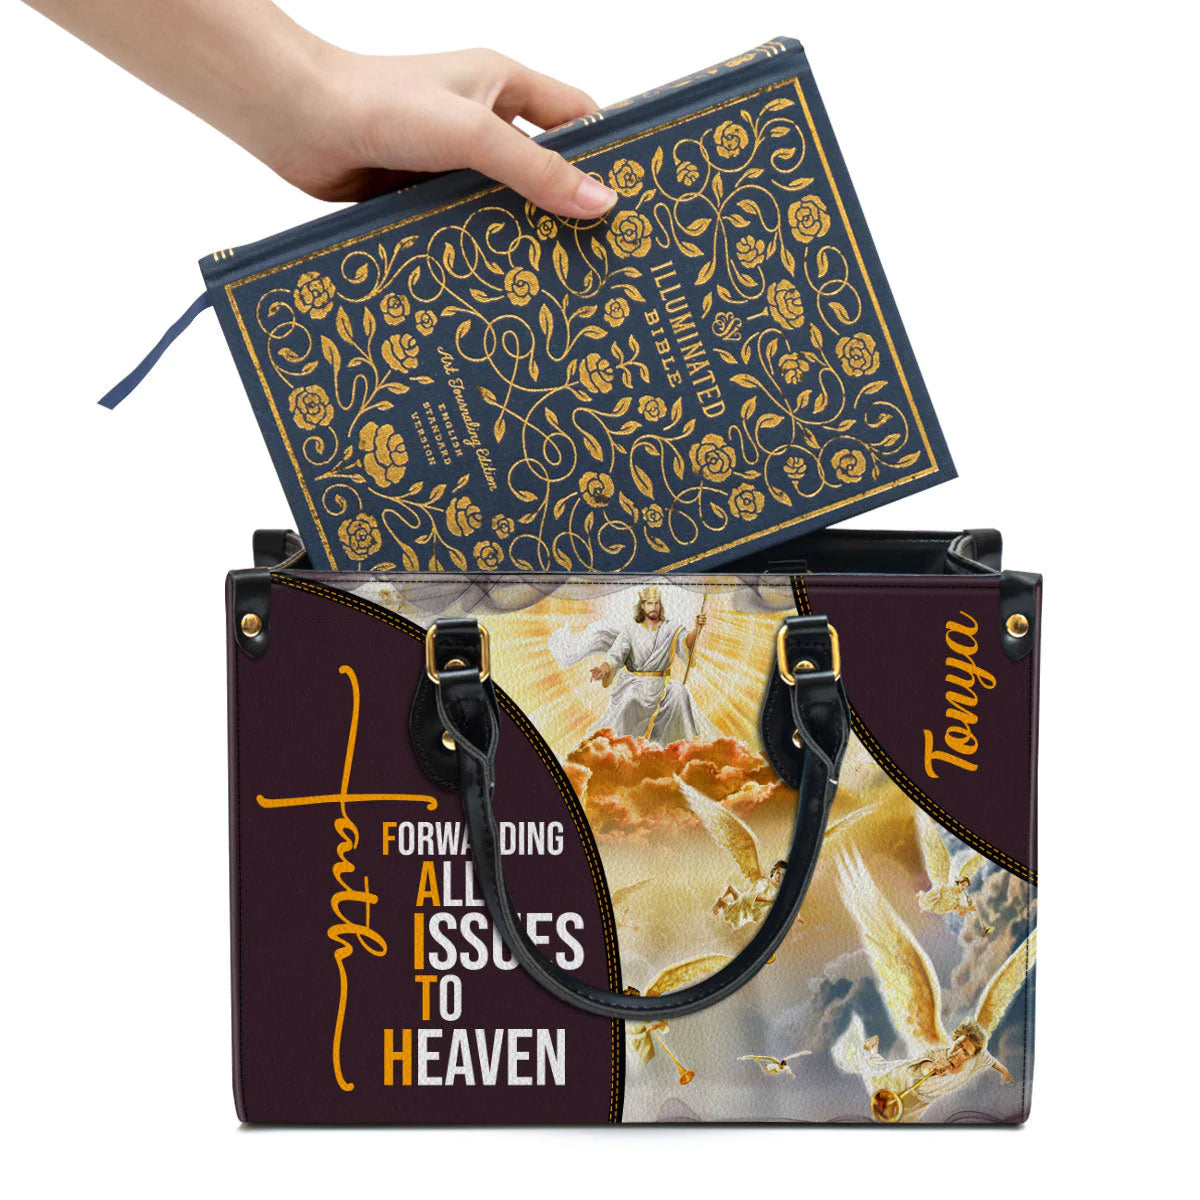 Christianartbag Handbag, Forwarding All Issues To The Heaven, Personalized Gifts, Gifts for Women, Christmas Gift. - Christian Art Bag